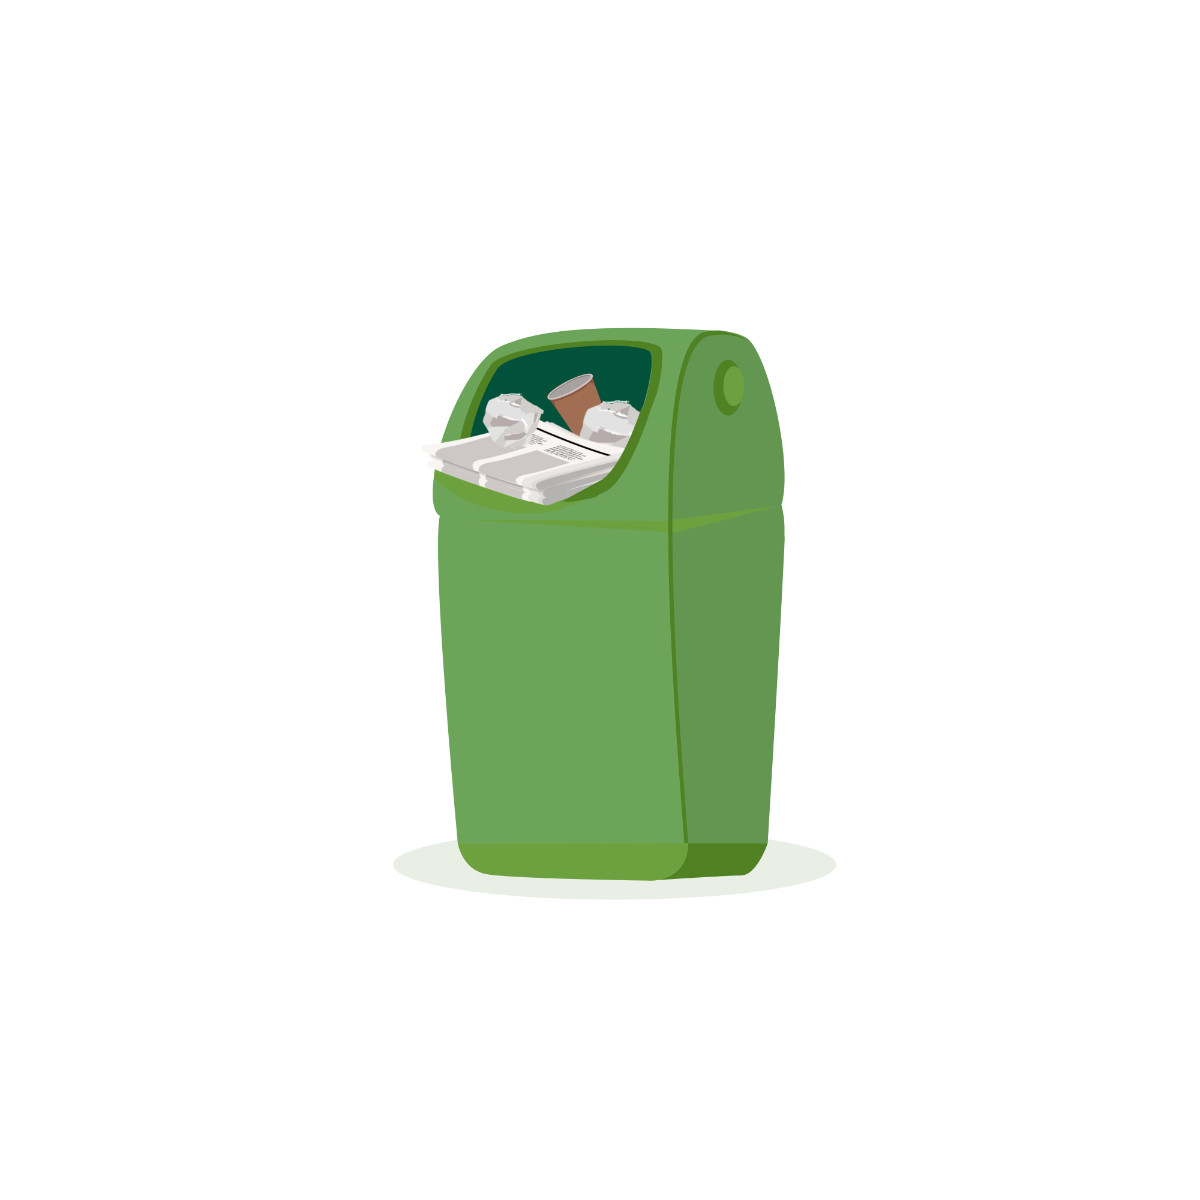 Recycle Paper Vector